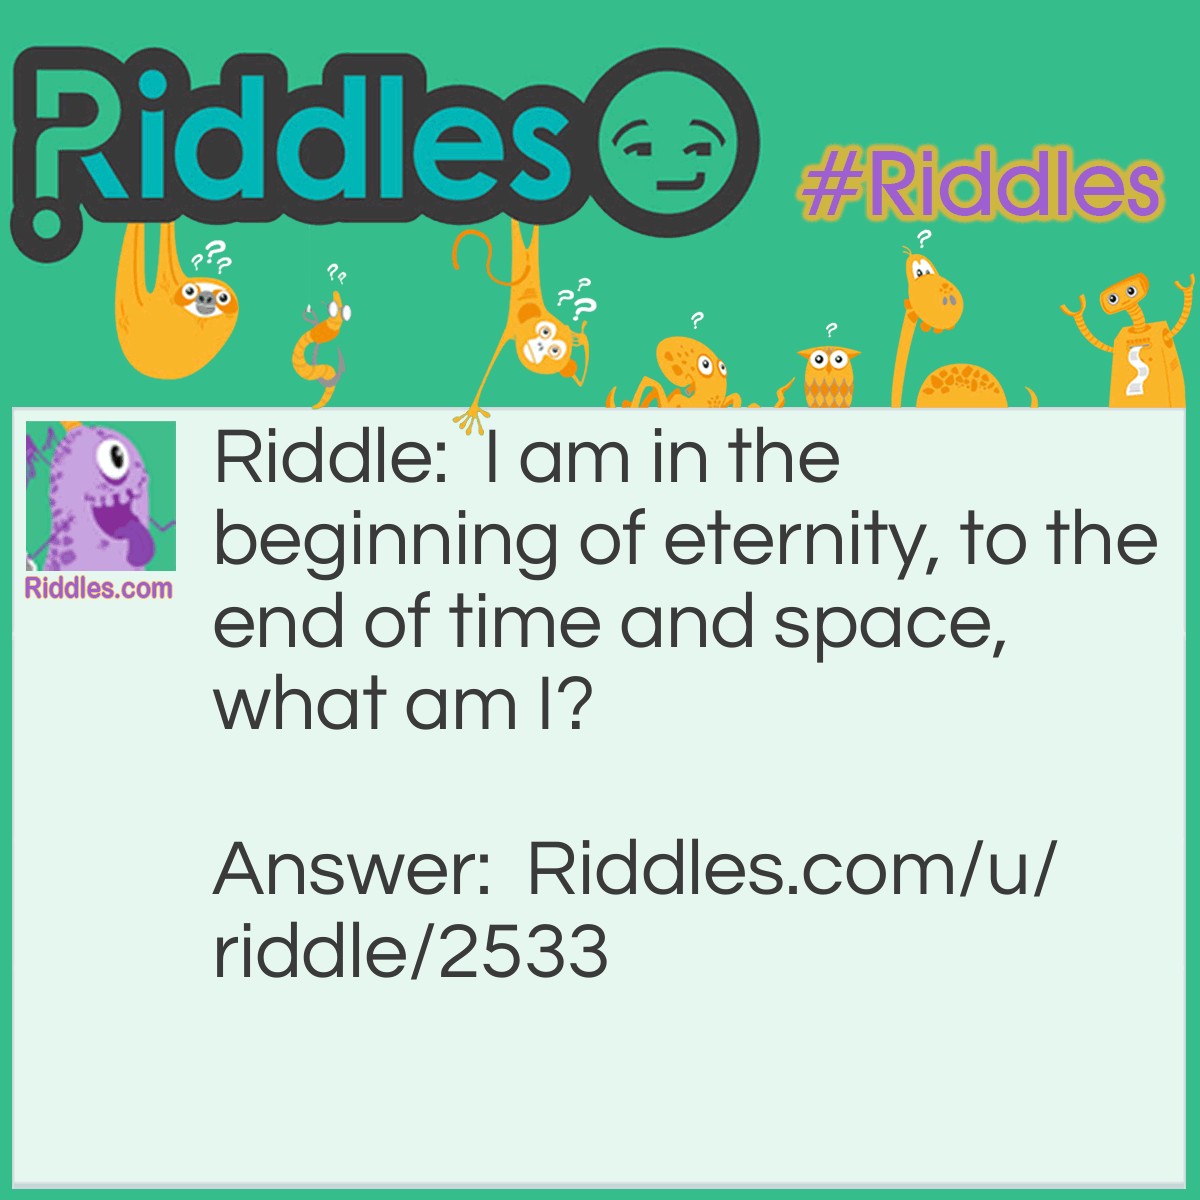 Riddle: I am in the beginning of eternity, to the end of time and space, what am I? Answer: I am the letter E.